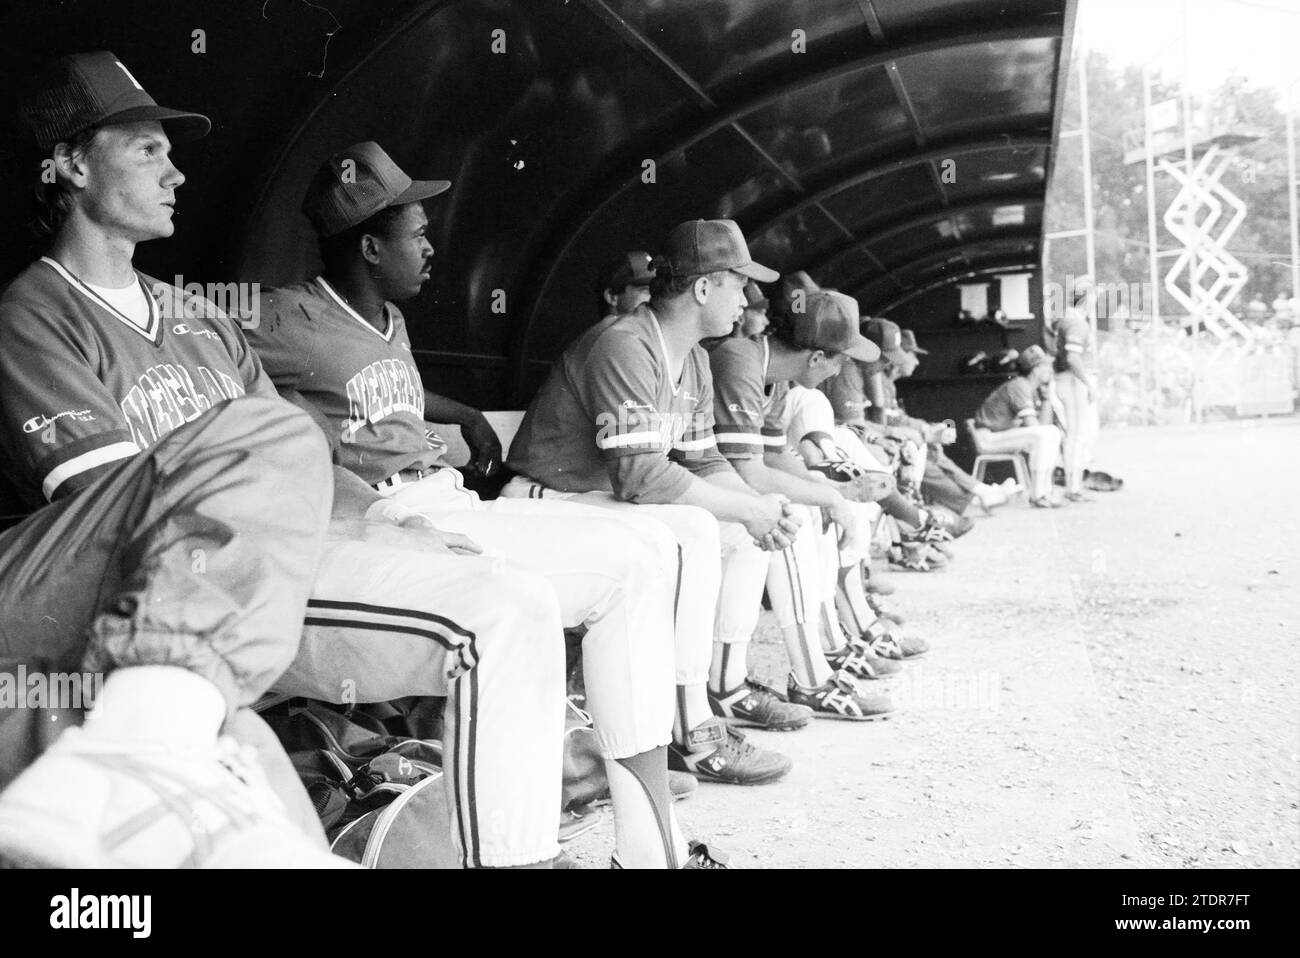 European Baseball Championship in Paris, Baseball, Parijs, Frankrijk, 10-09-1989, Whizgle News from the Past, Tailored for the Future. Explore historical narratives, Dutch The Netherlands agency image with a modern perspective, bridging the gap between yesterday's events and tomorrow's insights. A timeless journey shaping the stories that shape our future Stock Photo